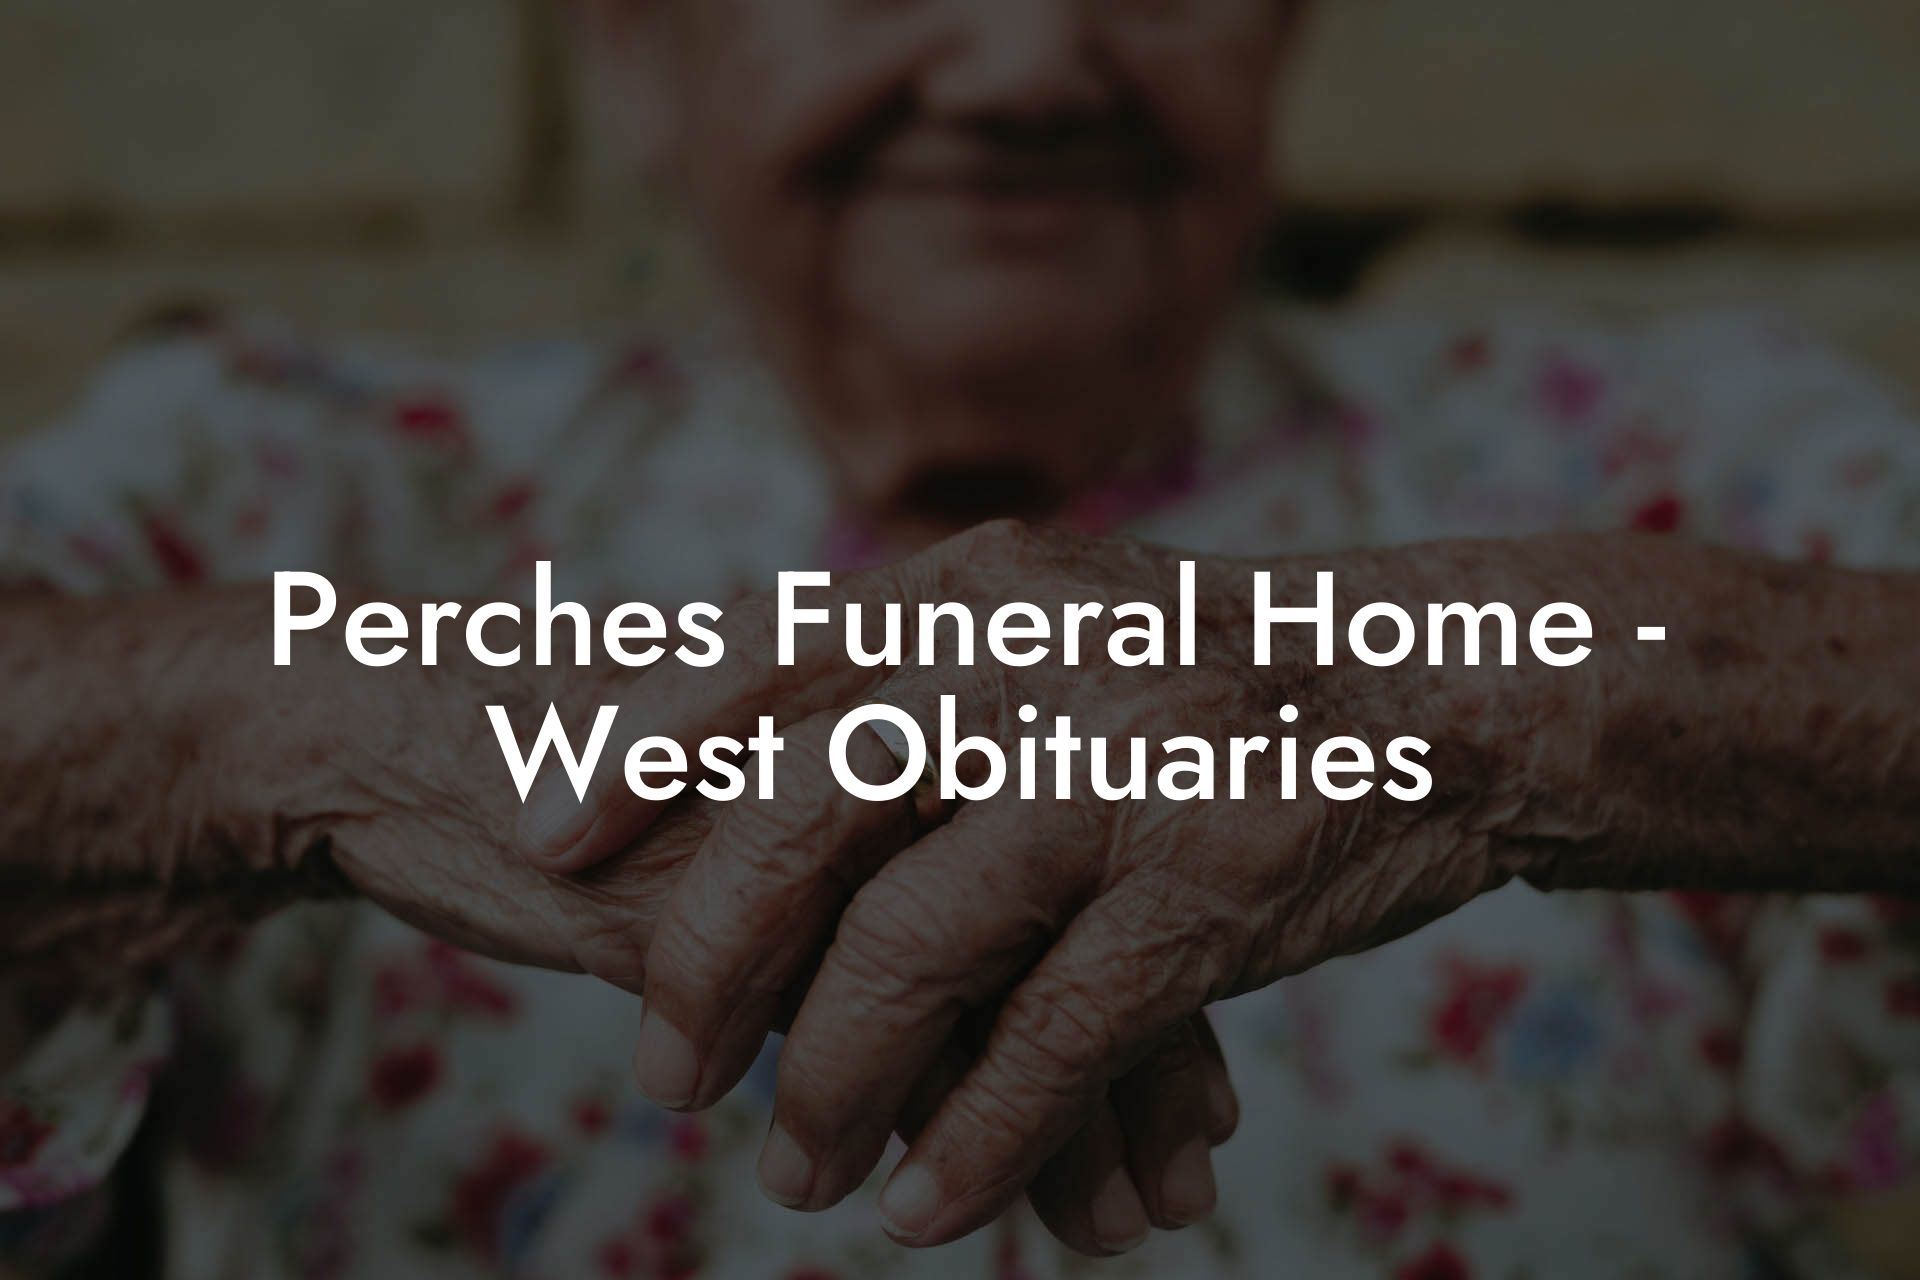 Perches Funeral Home - West Obituaries